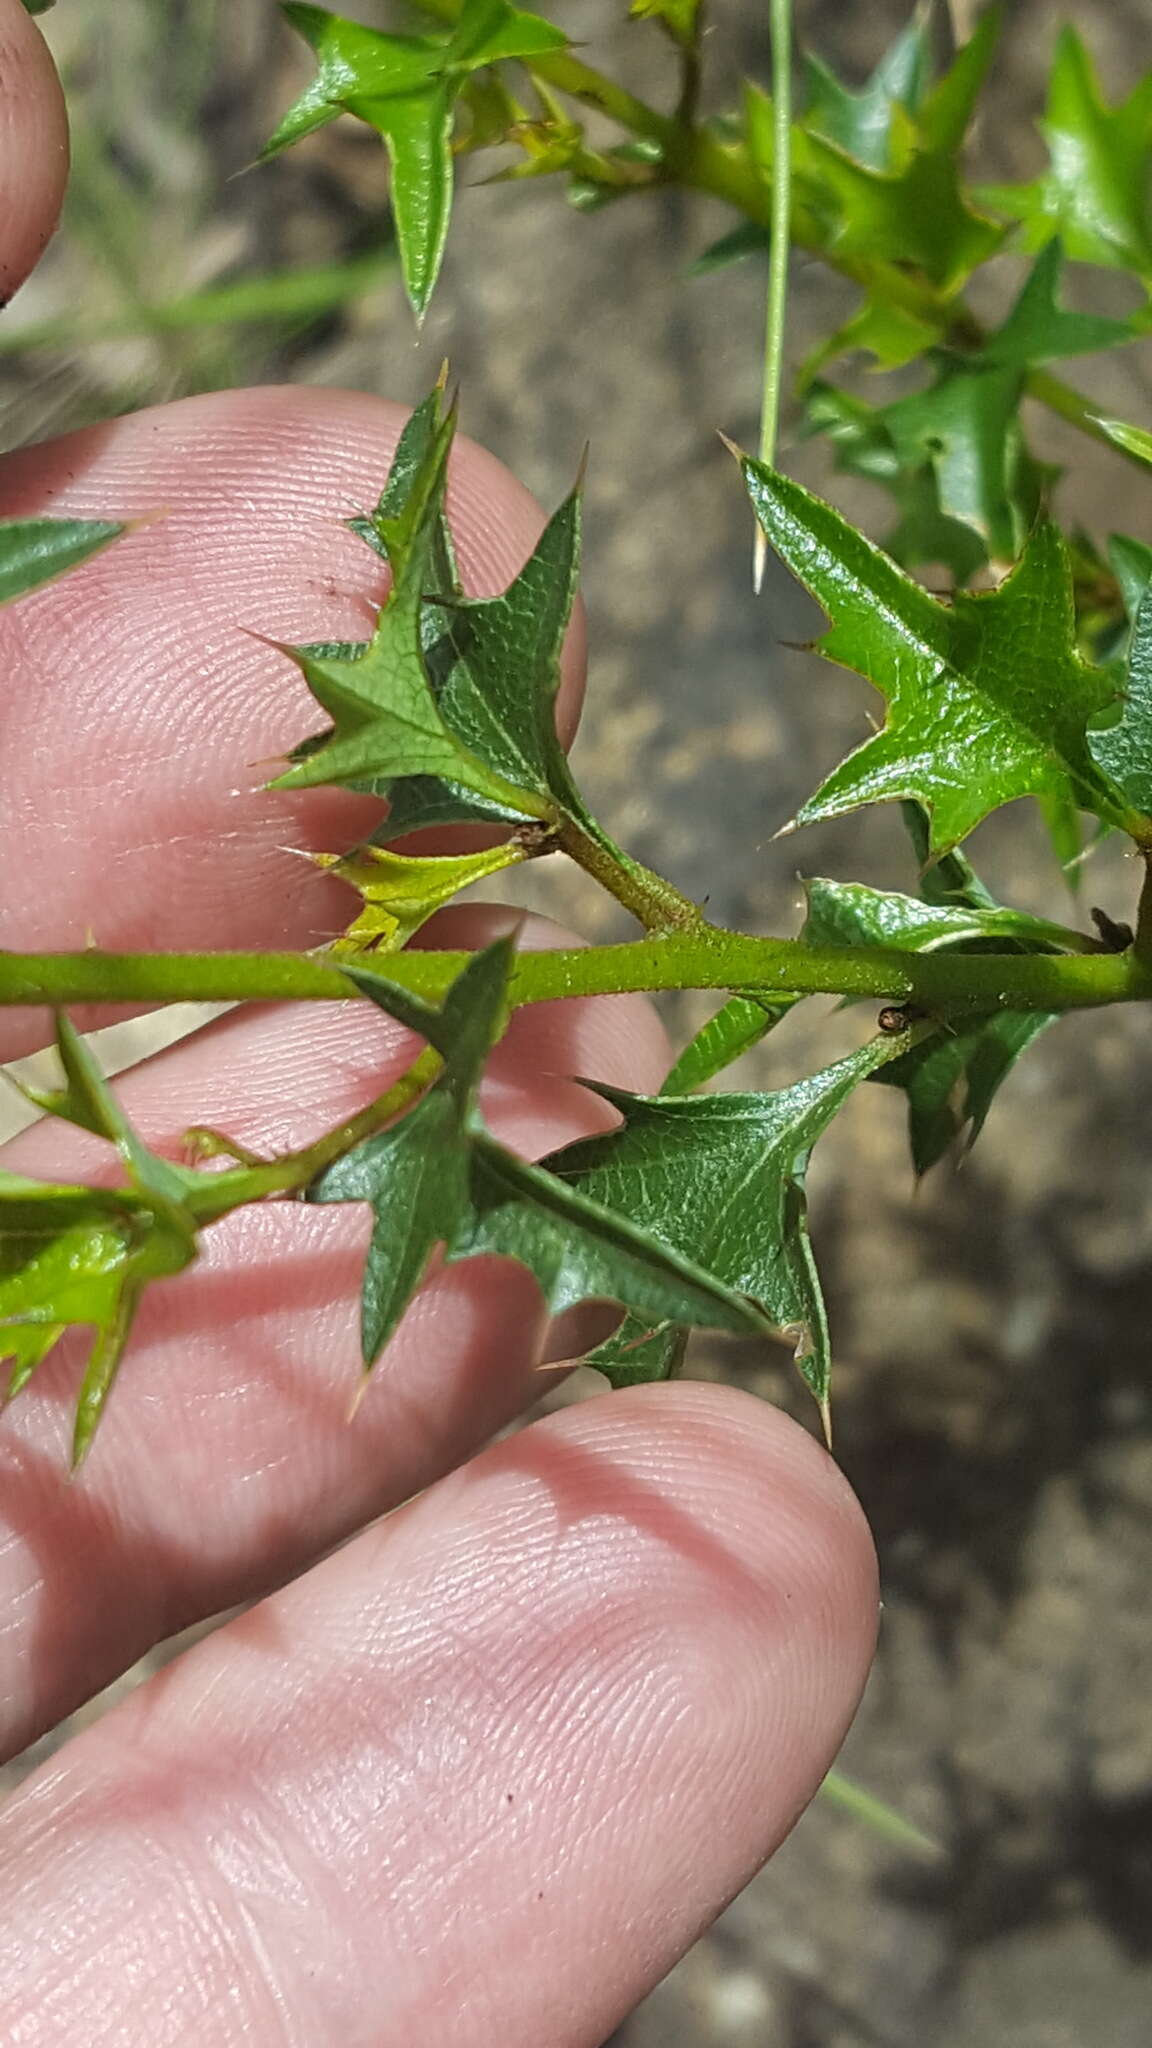 Image of Native Holly